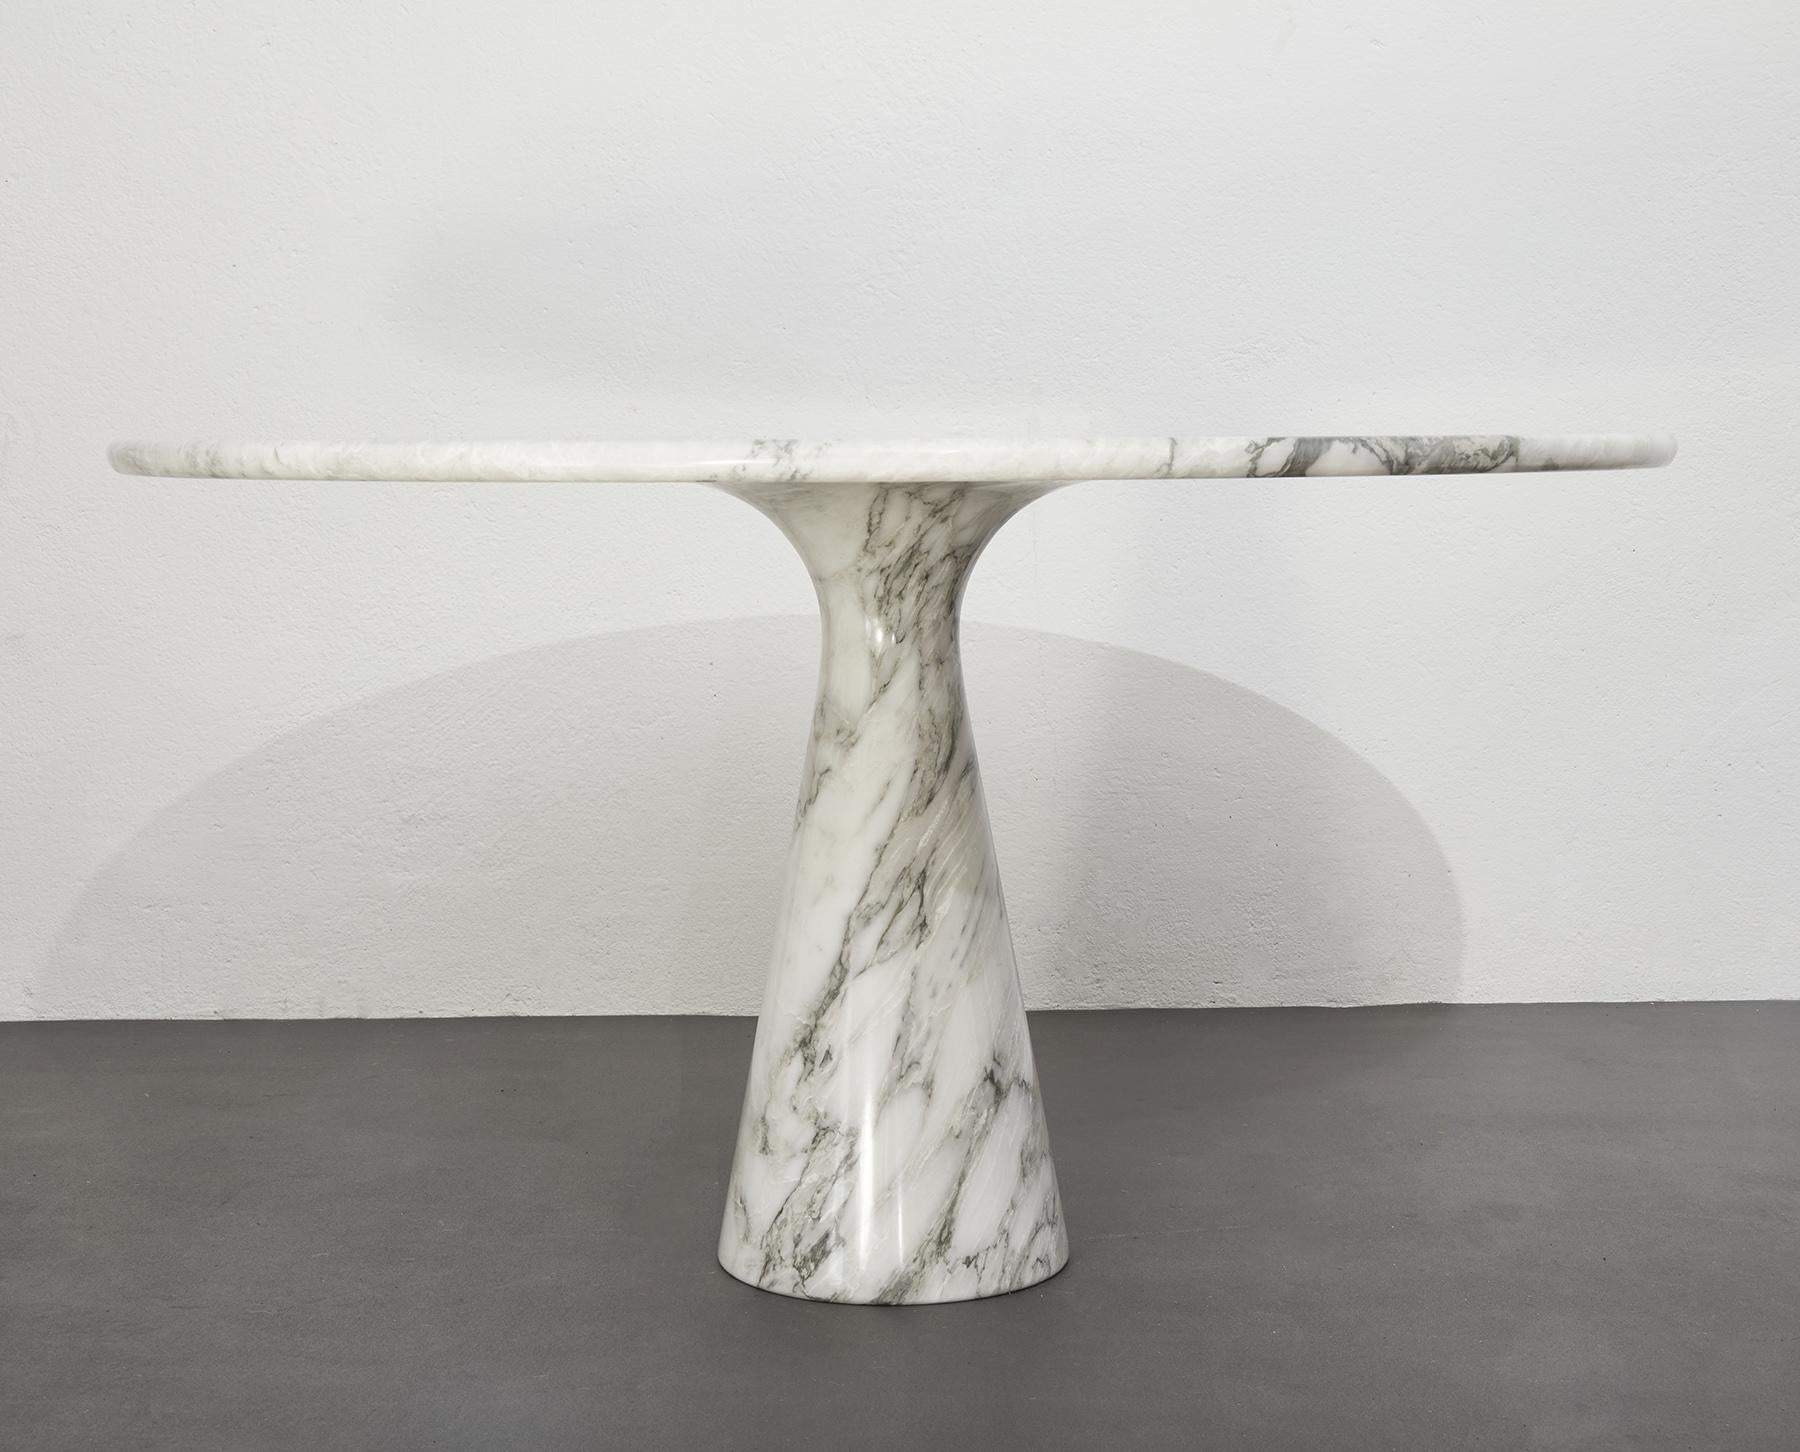 Angelo Mangiarotti M1 dining table Skipper, arabescato marble, Italy 1969

Beautiful example of the M1 all arabescato marble dining table.

The veins of the top are really stunning boasting some yellow streaks that add even more beauty to the